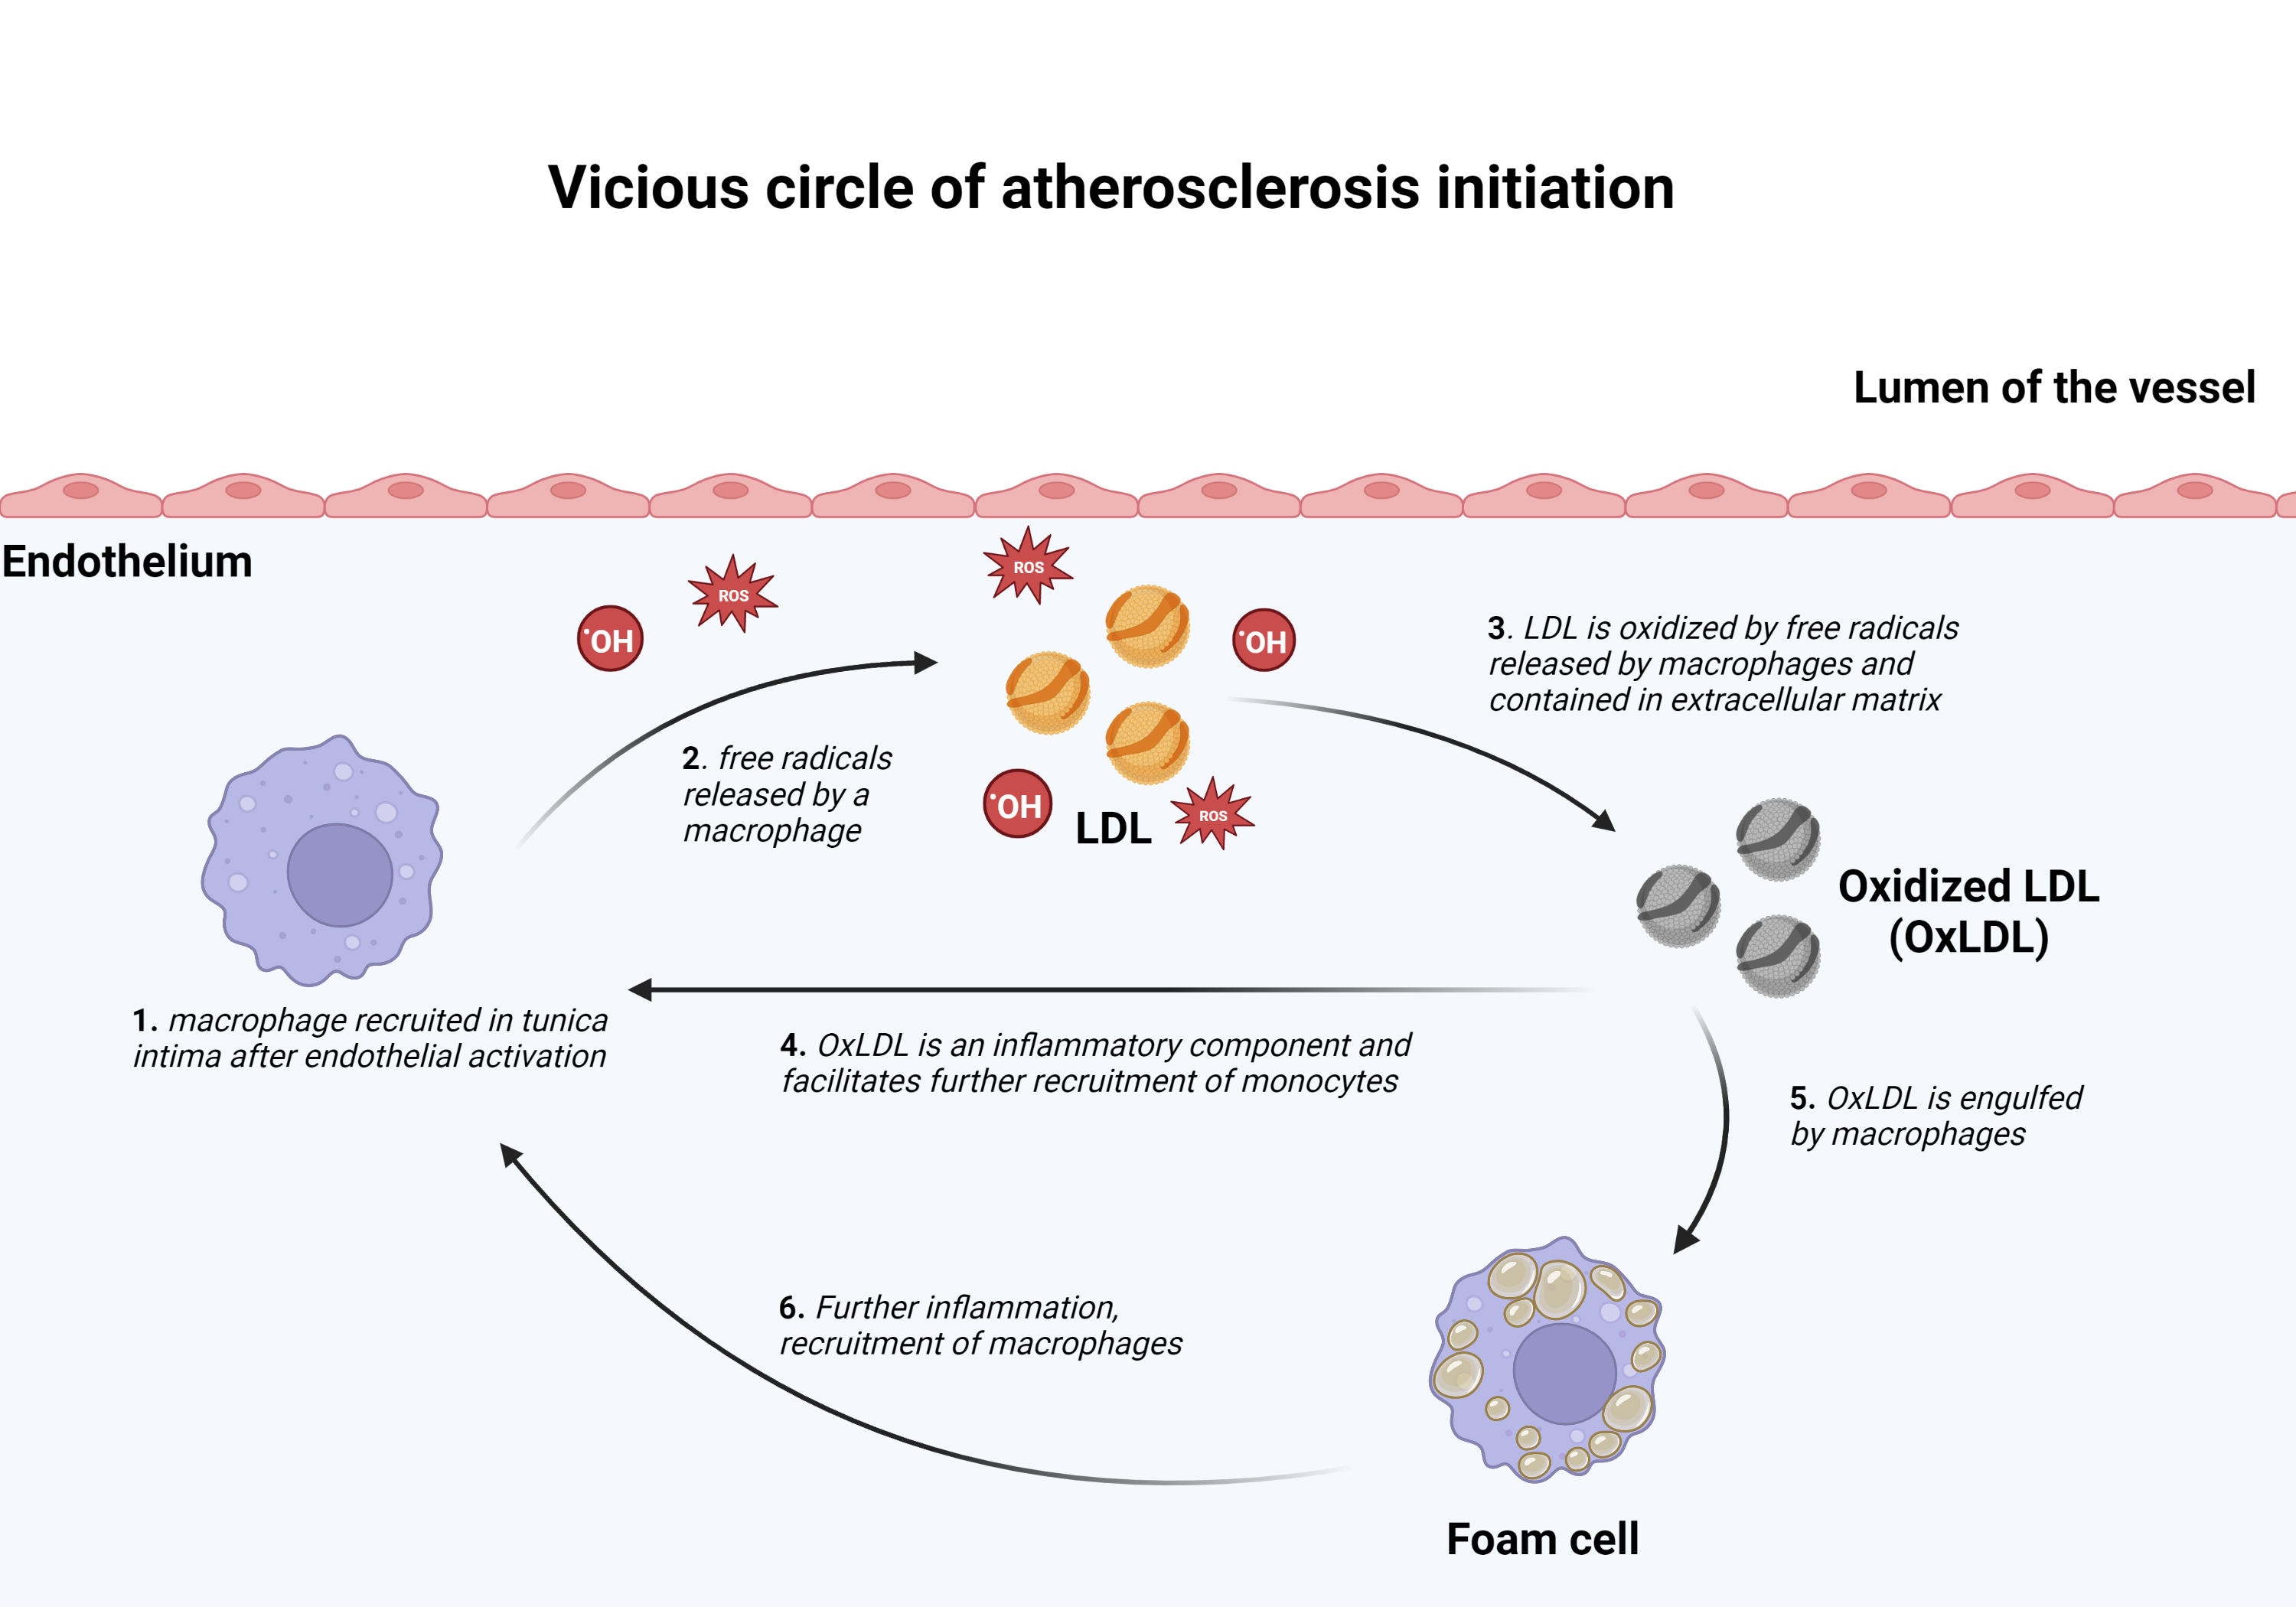 the life cycle of a macrophage in the subendothelial space of a vessel. A newly recruited macrophage enters the subendothelial space and releases its free radicals as part of its inflammatory role. These radicals convert LDL to oxidized LDL. The macrophages then engulf the oxidized LDL transforming the macrophage into a fat-laden foam cell. The foam cell then sends inflammatory chemicals which recruit more macrophages to the site and the cycle continues.